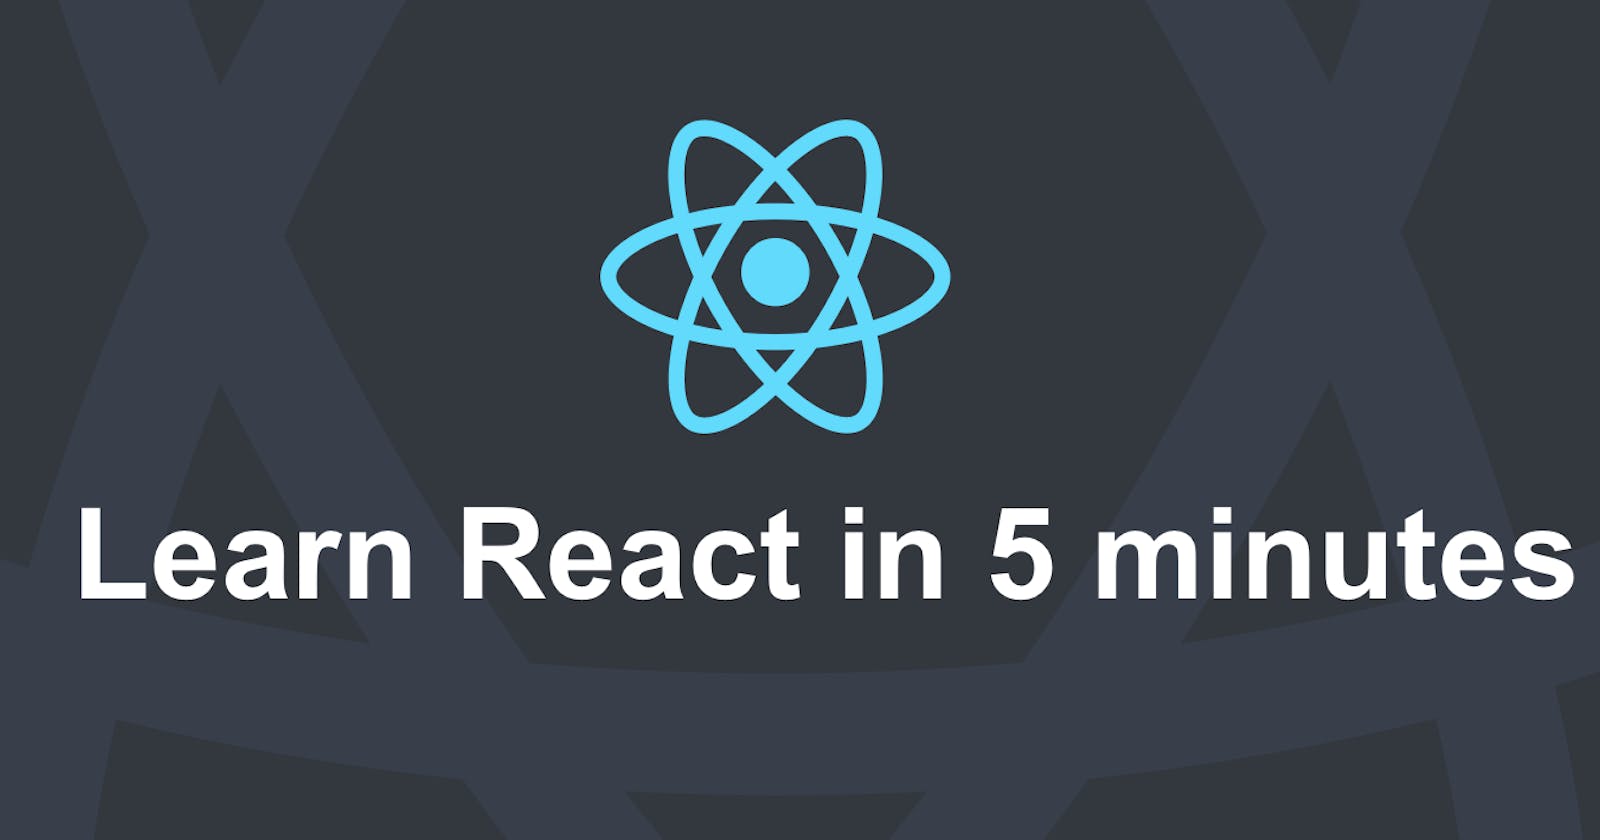 Learn React in 5 minutes